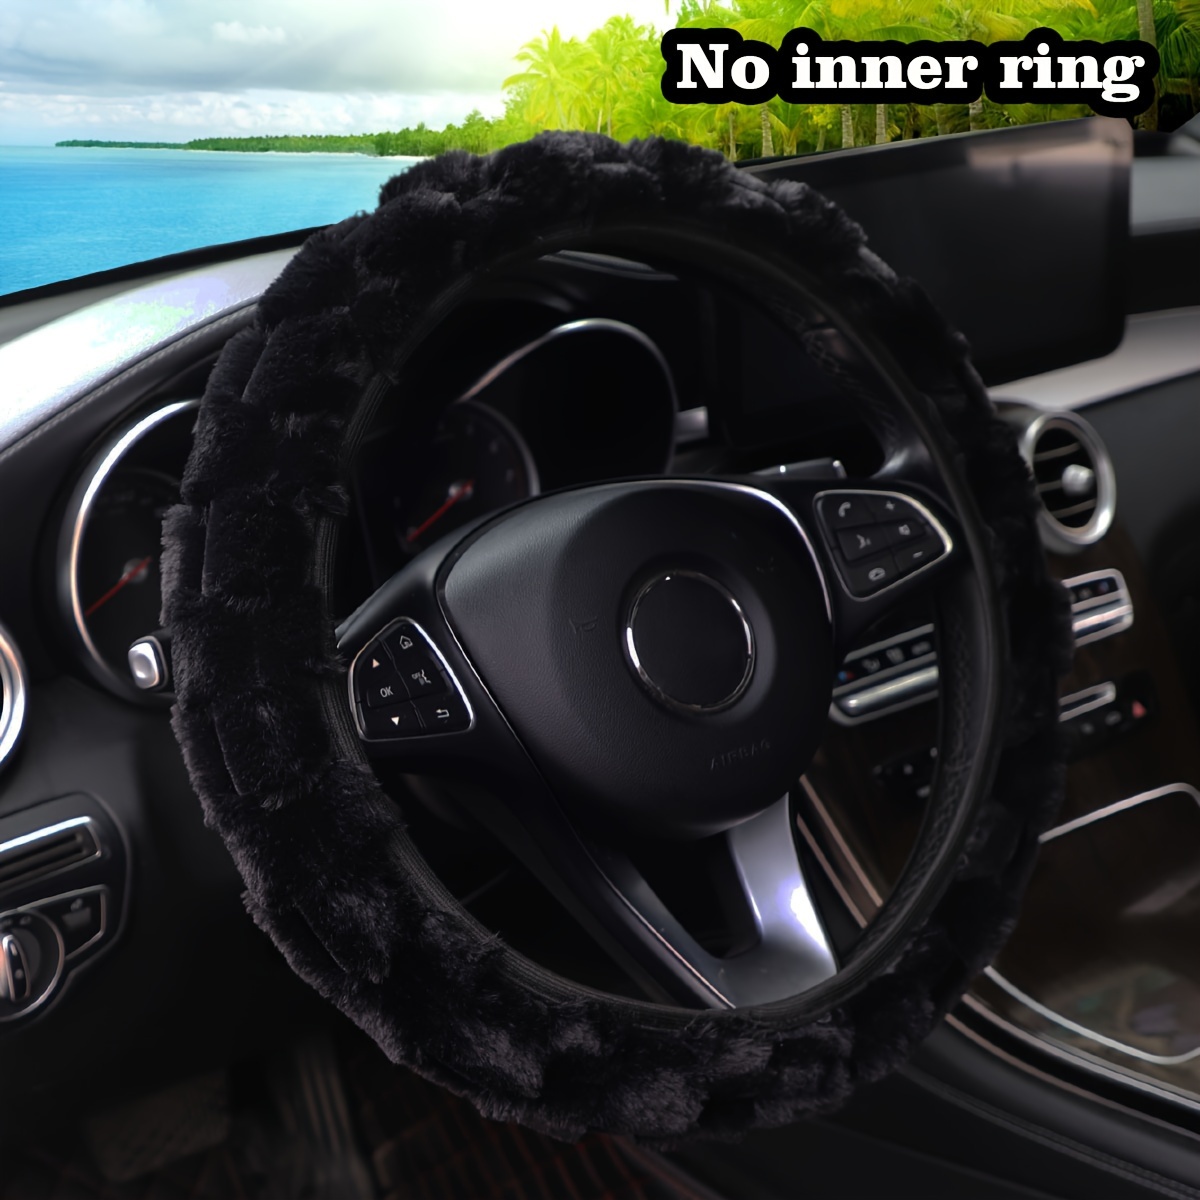 

1pc Winter Plush Comfortable Delicate Warm Three-dimensional Artificial Rabbit Hair No Inner Ring Car Steering Wheel Cover Fits 14.1-15inch